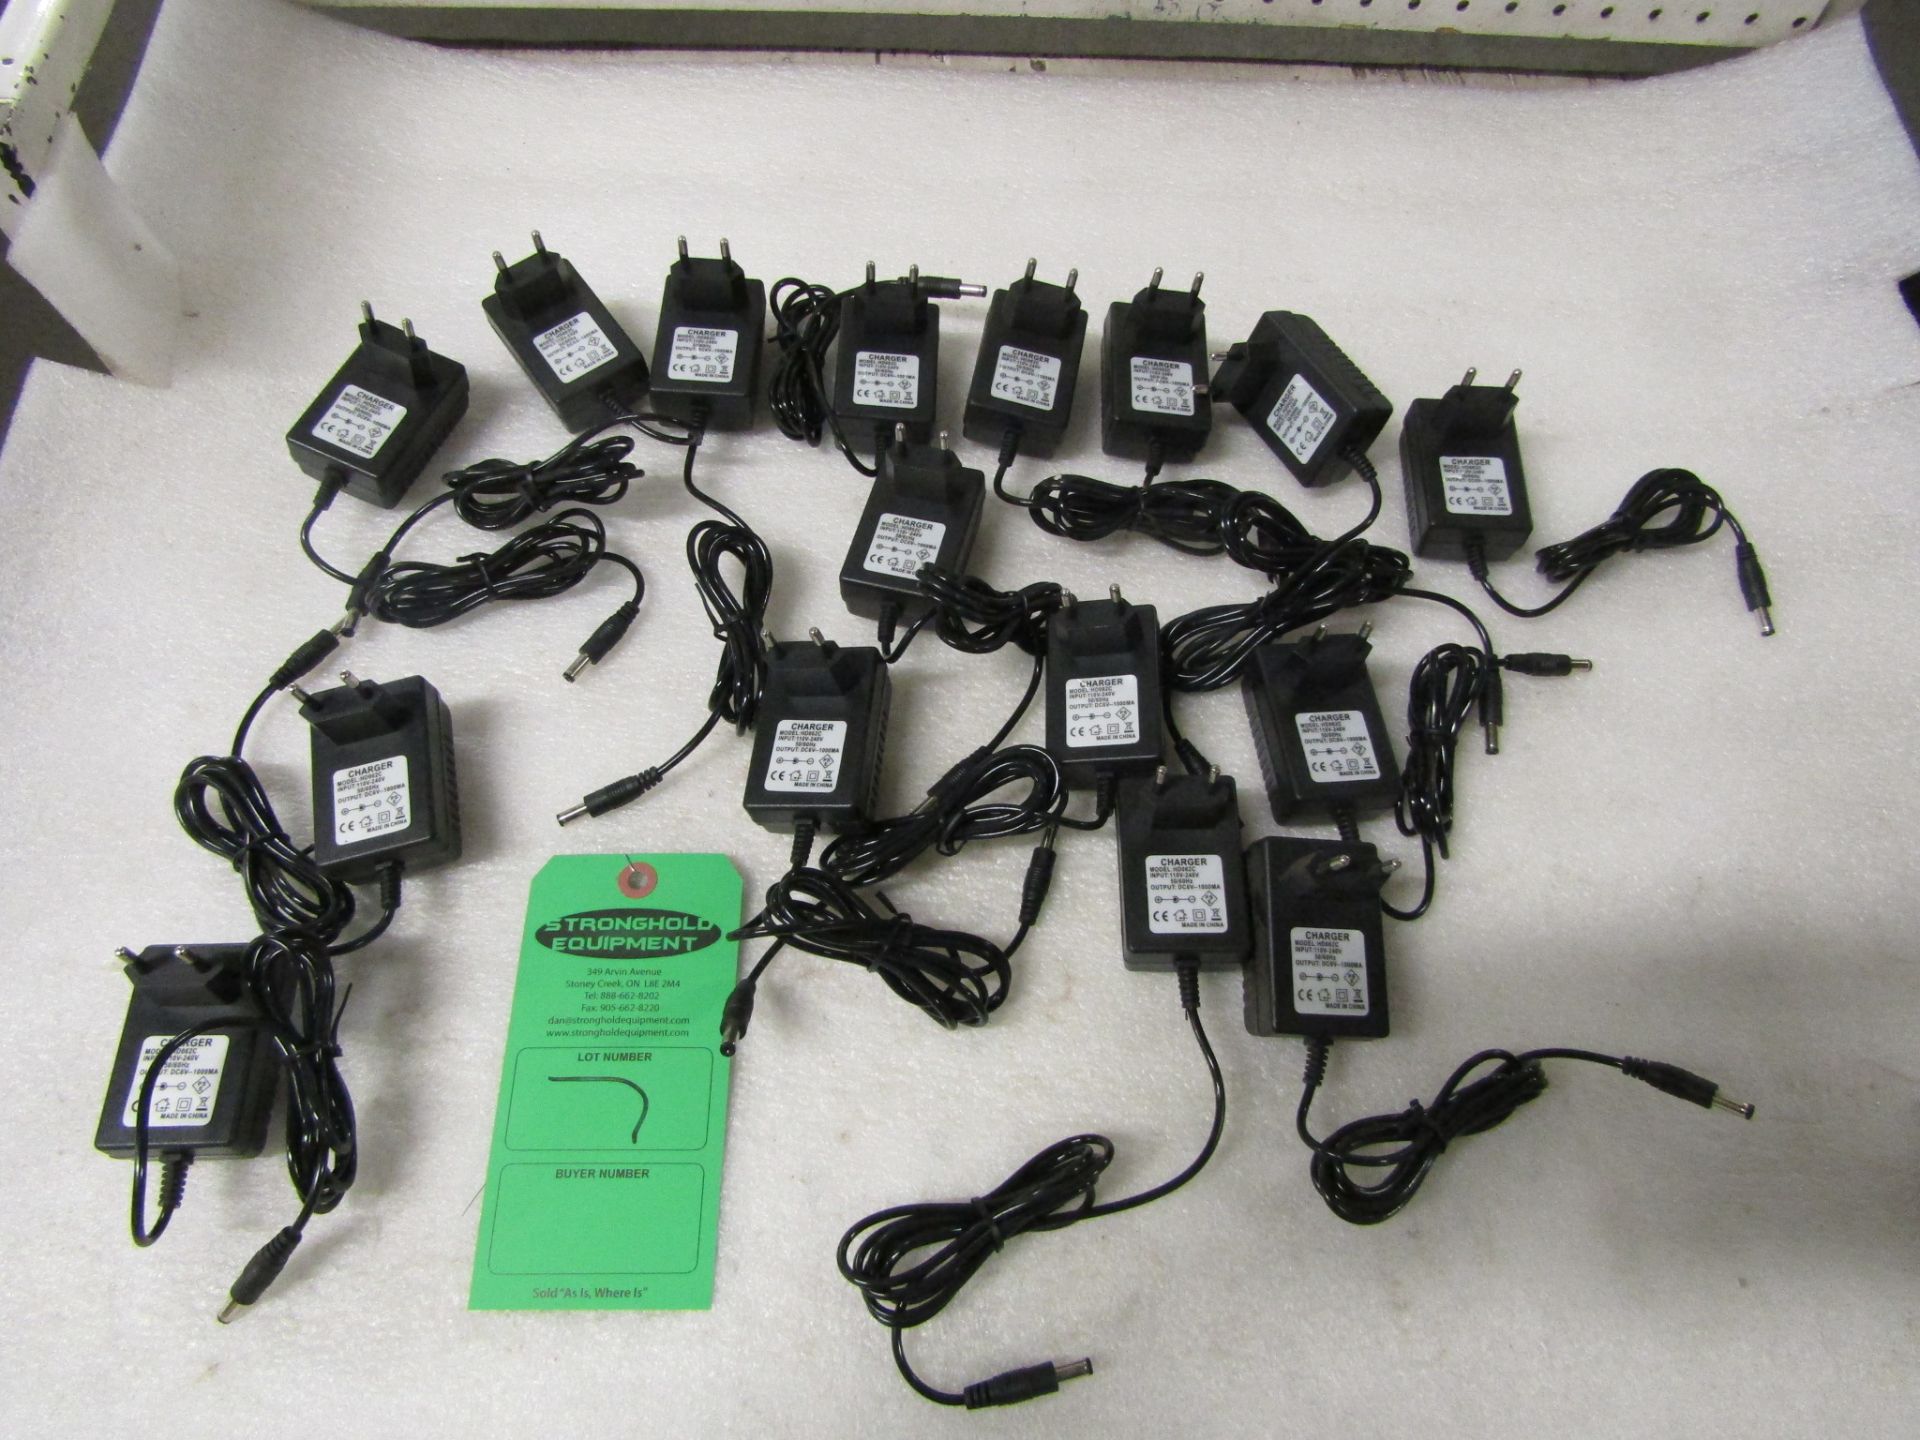 Lot of 240V & 6V battery chargers